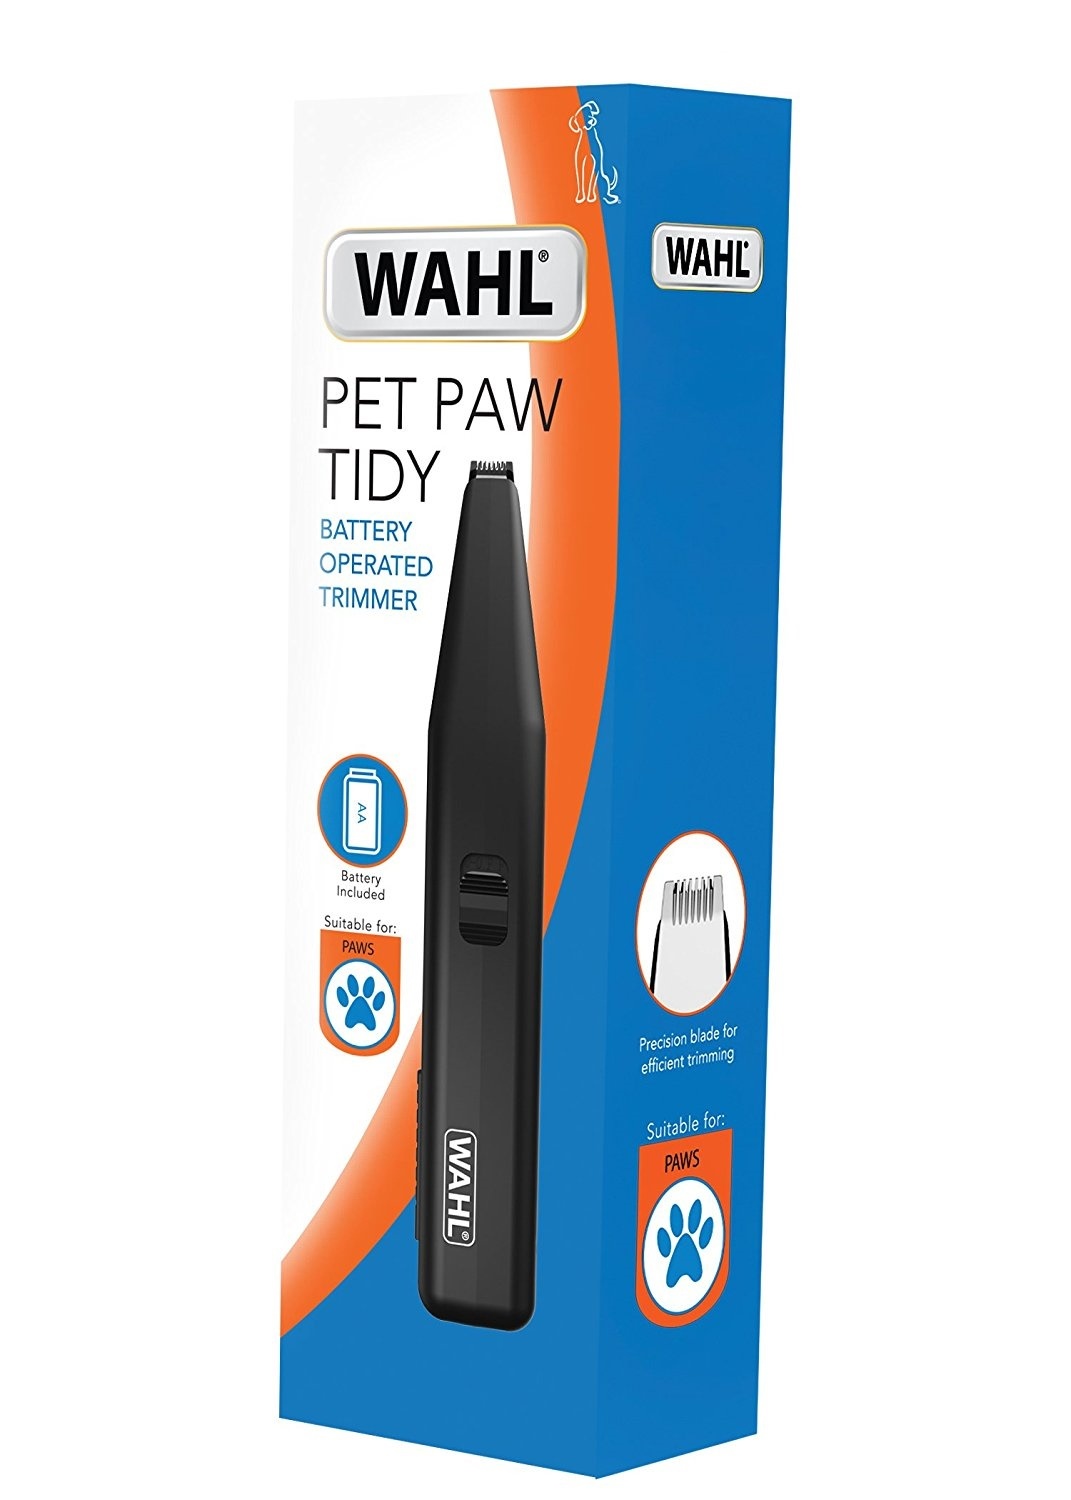 wahl paw tidy pet trimmer